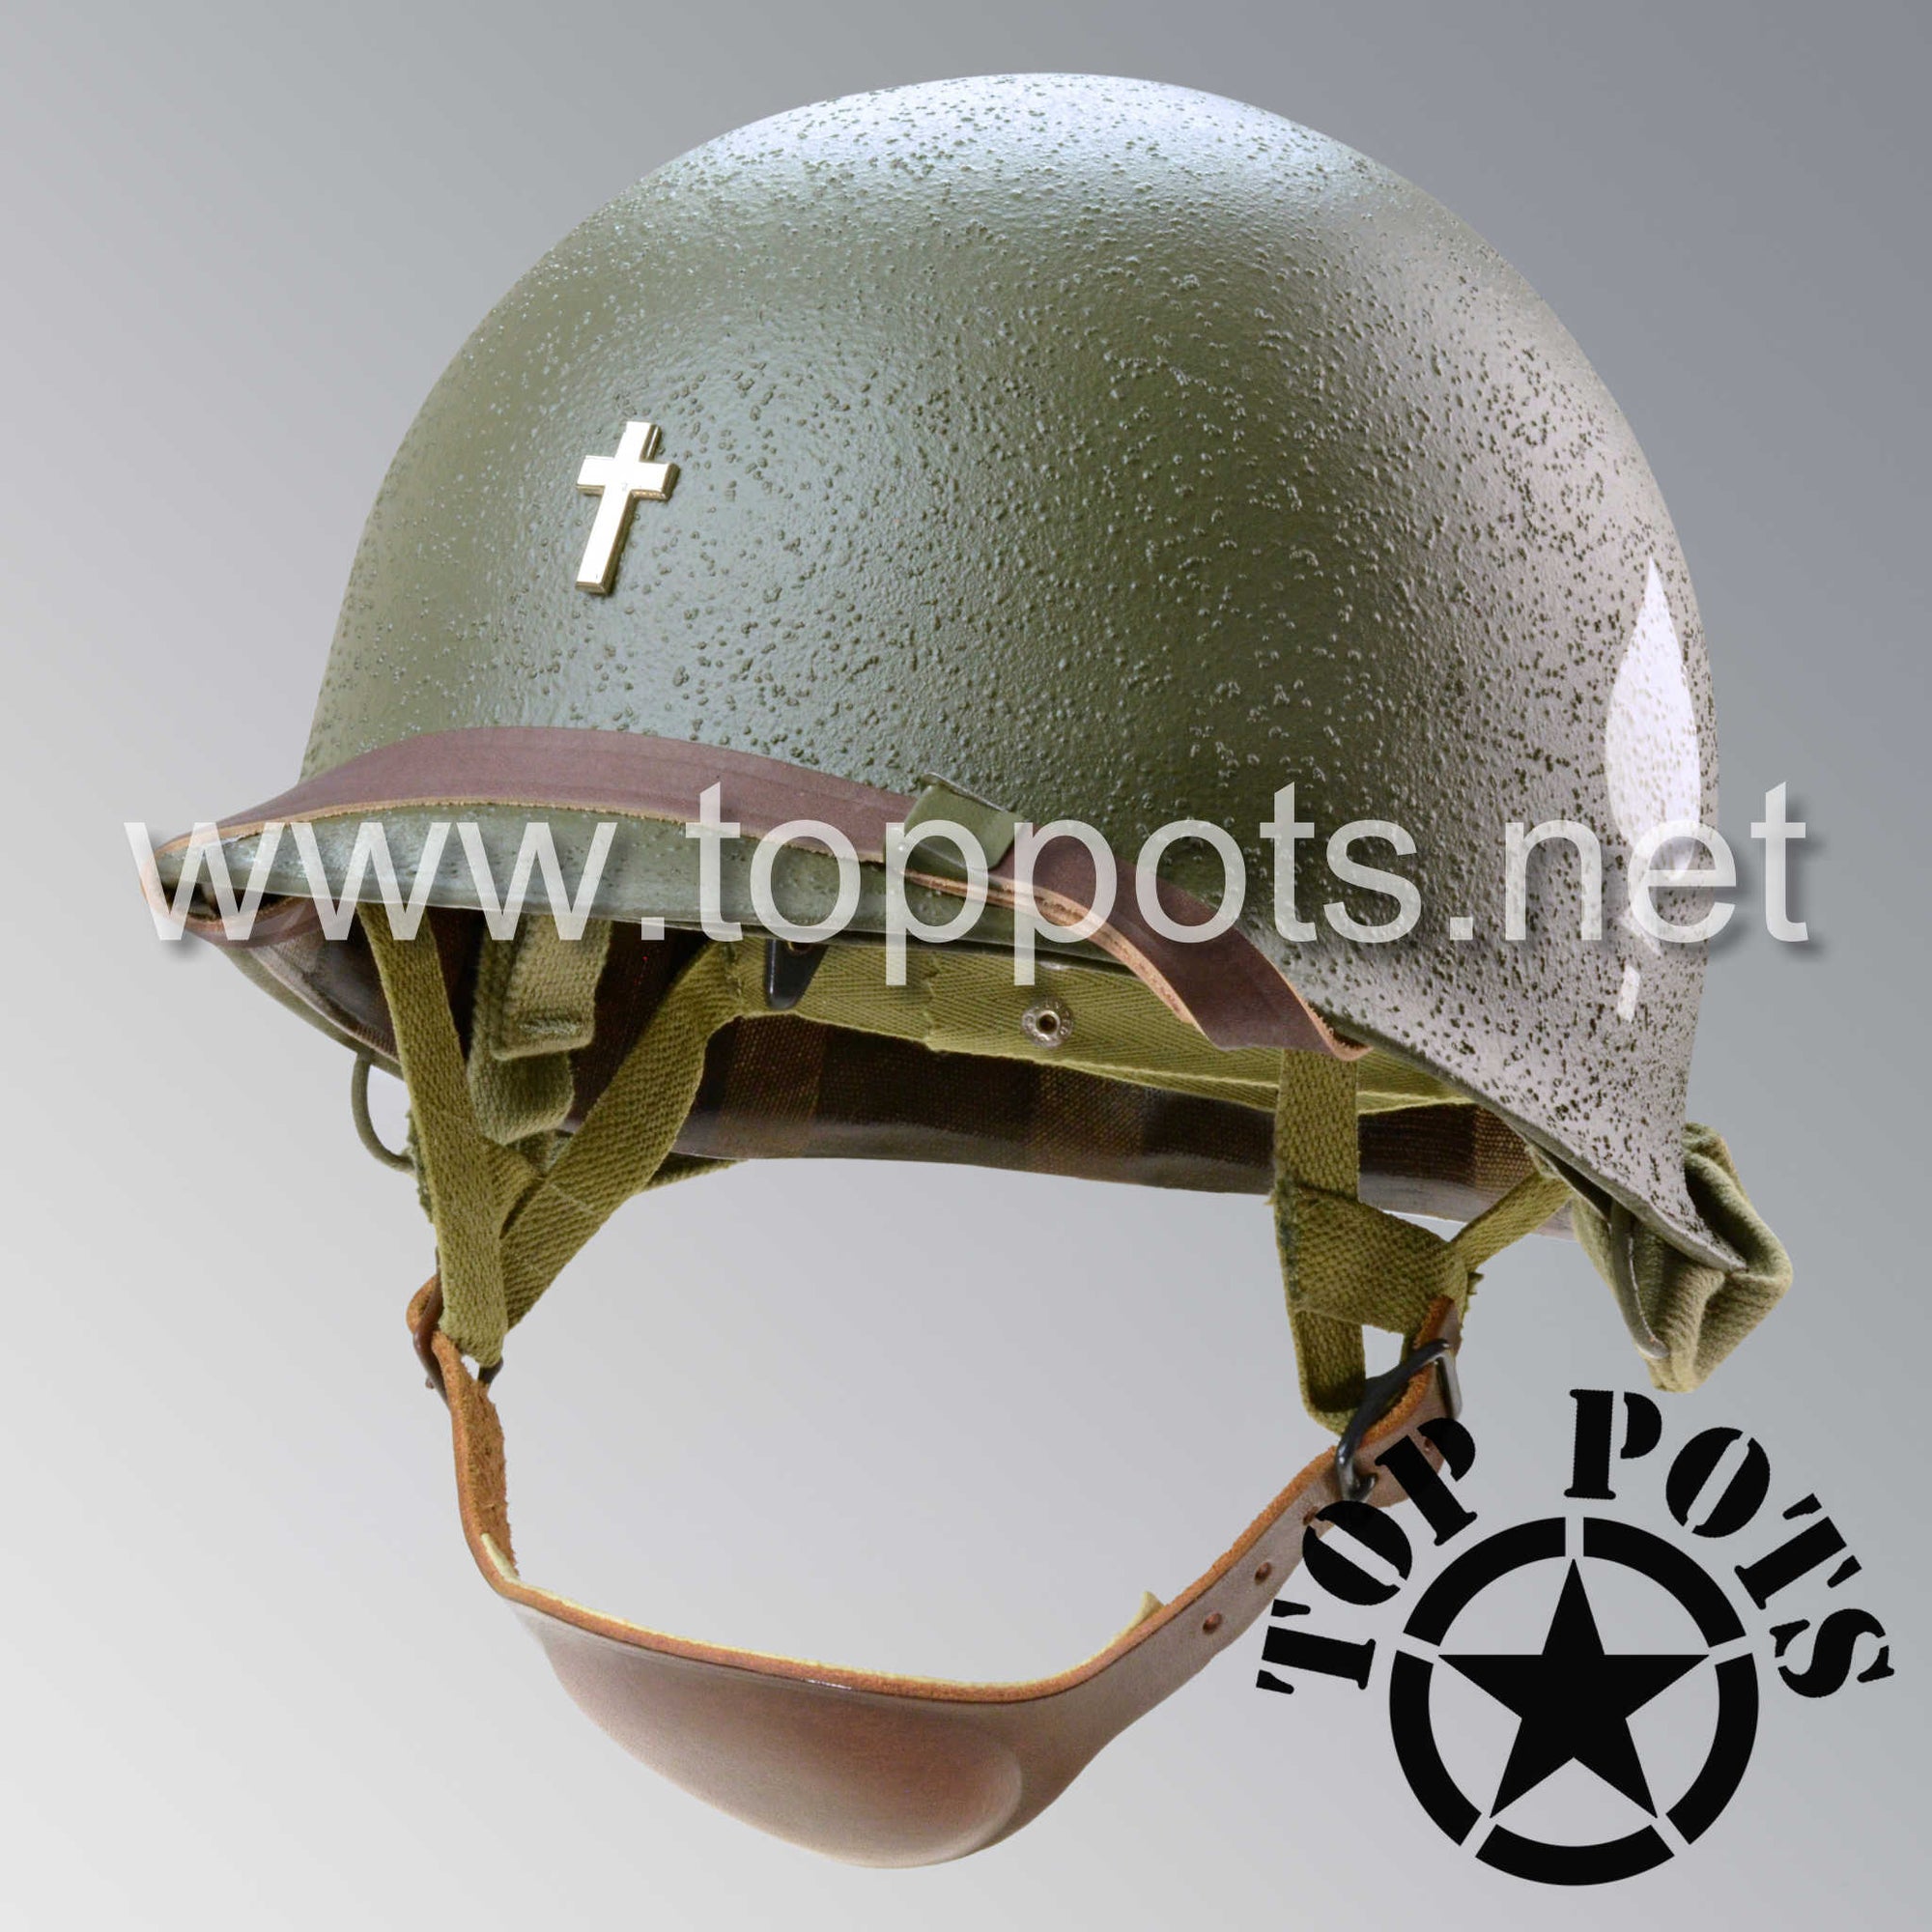 WWII US Army Restored Original M2 Paratrooper Airborne Helmet D Bale Shell and Liner with 506th 2nd Battalion PIR Chaplain Officer Emblem